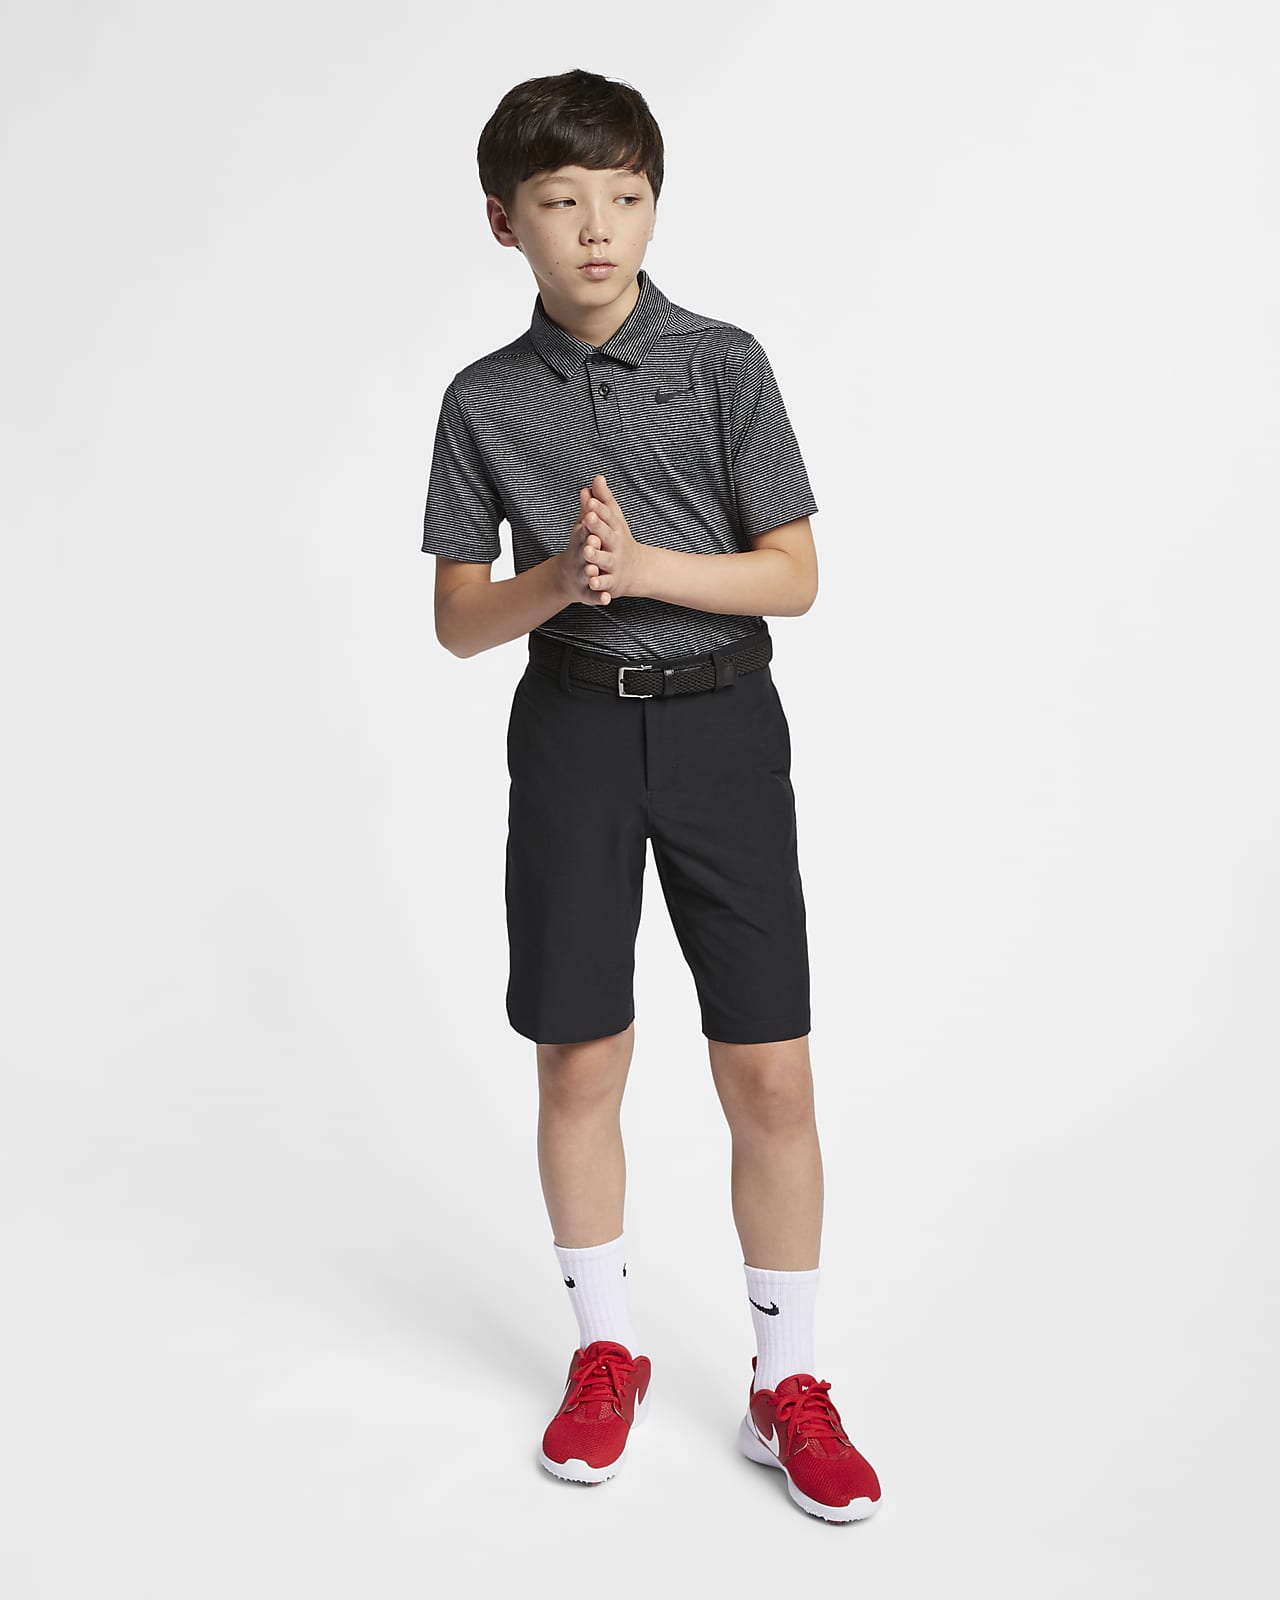 nike kids golf clothes